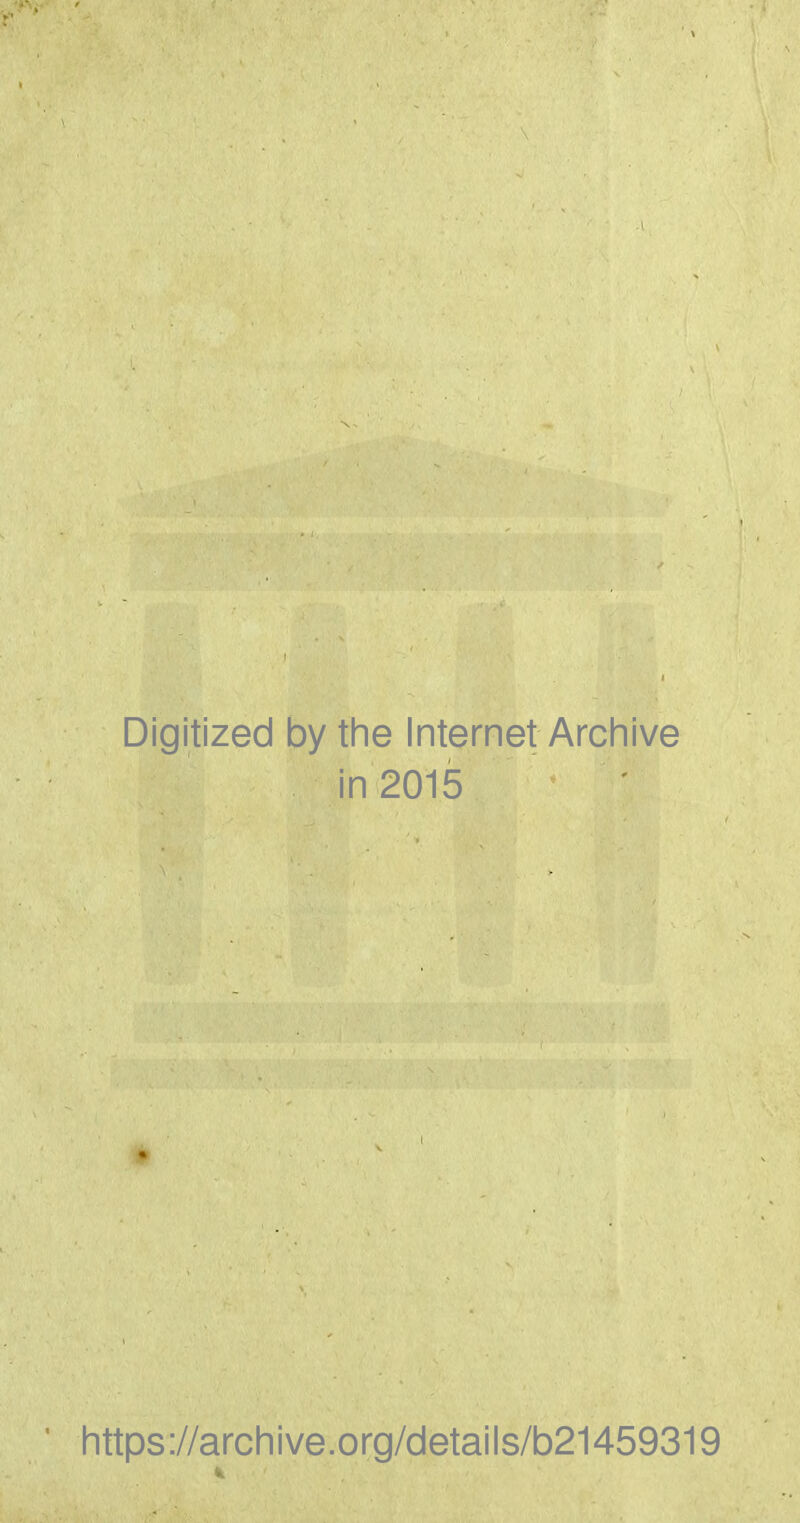 Digitized by the Internet Archive in 2015 https://archive.org/details/b21459319 Ik